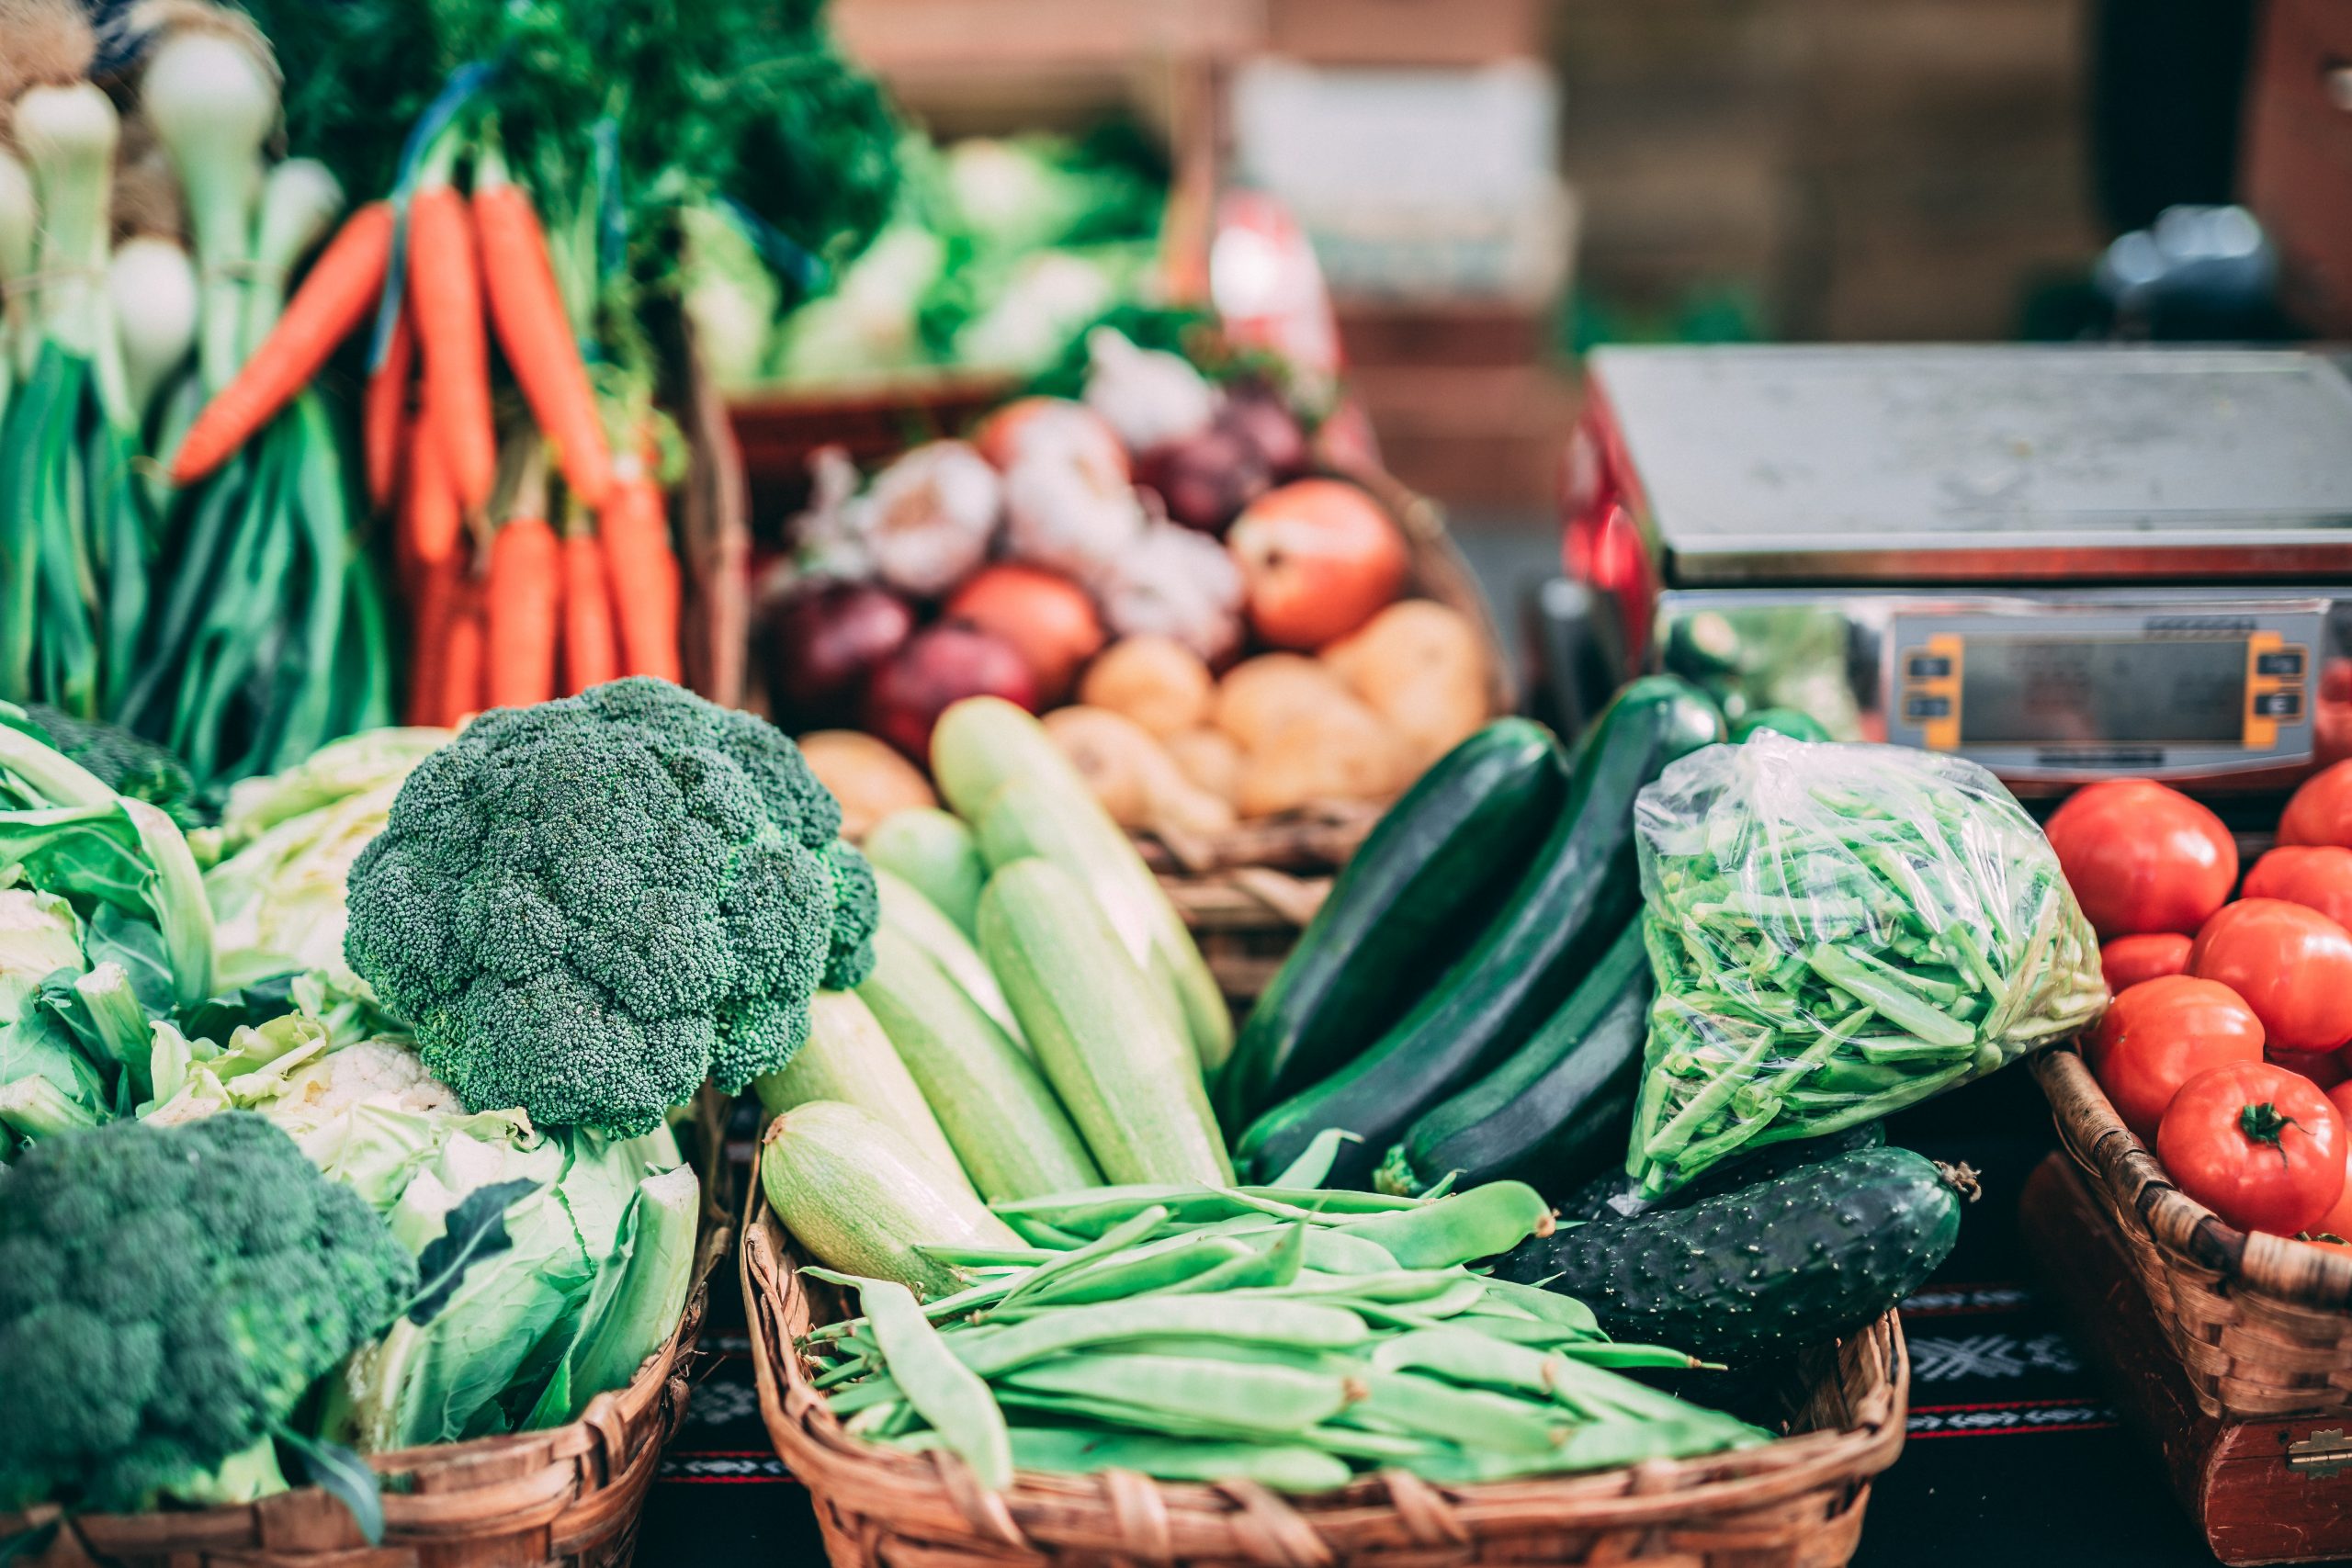 A diet rich in vegetables does not reduce the risk of cardiovascular disease